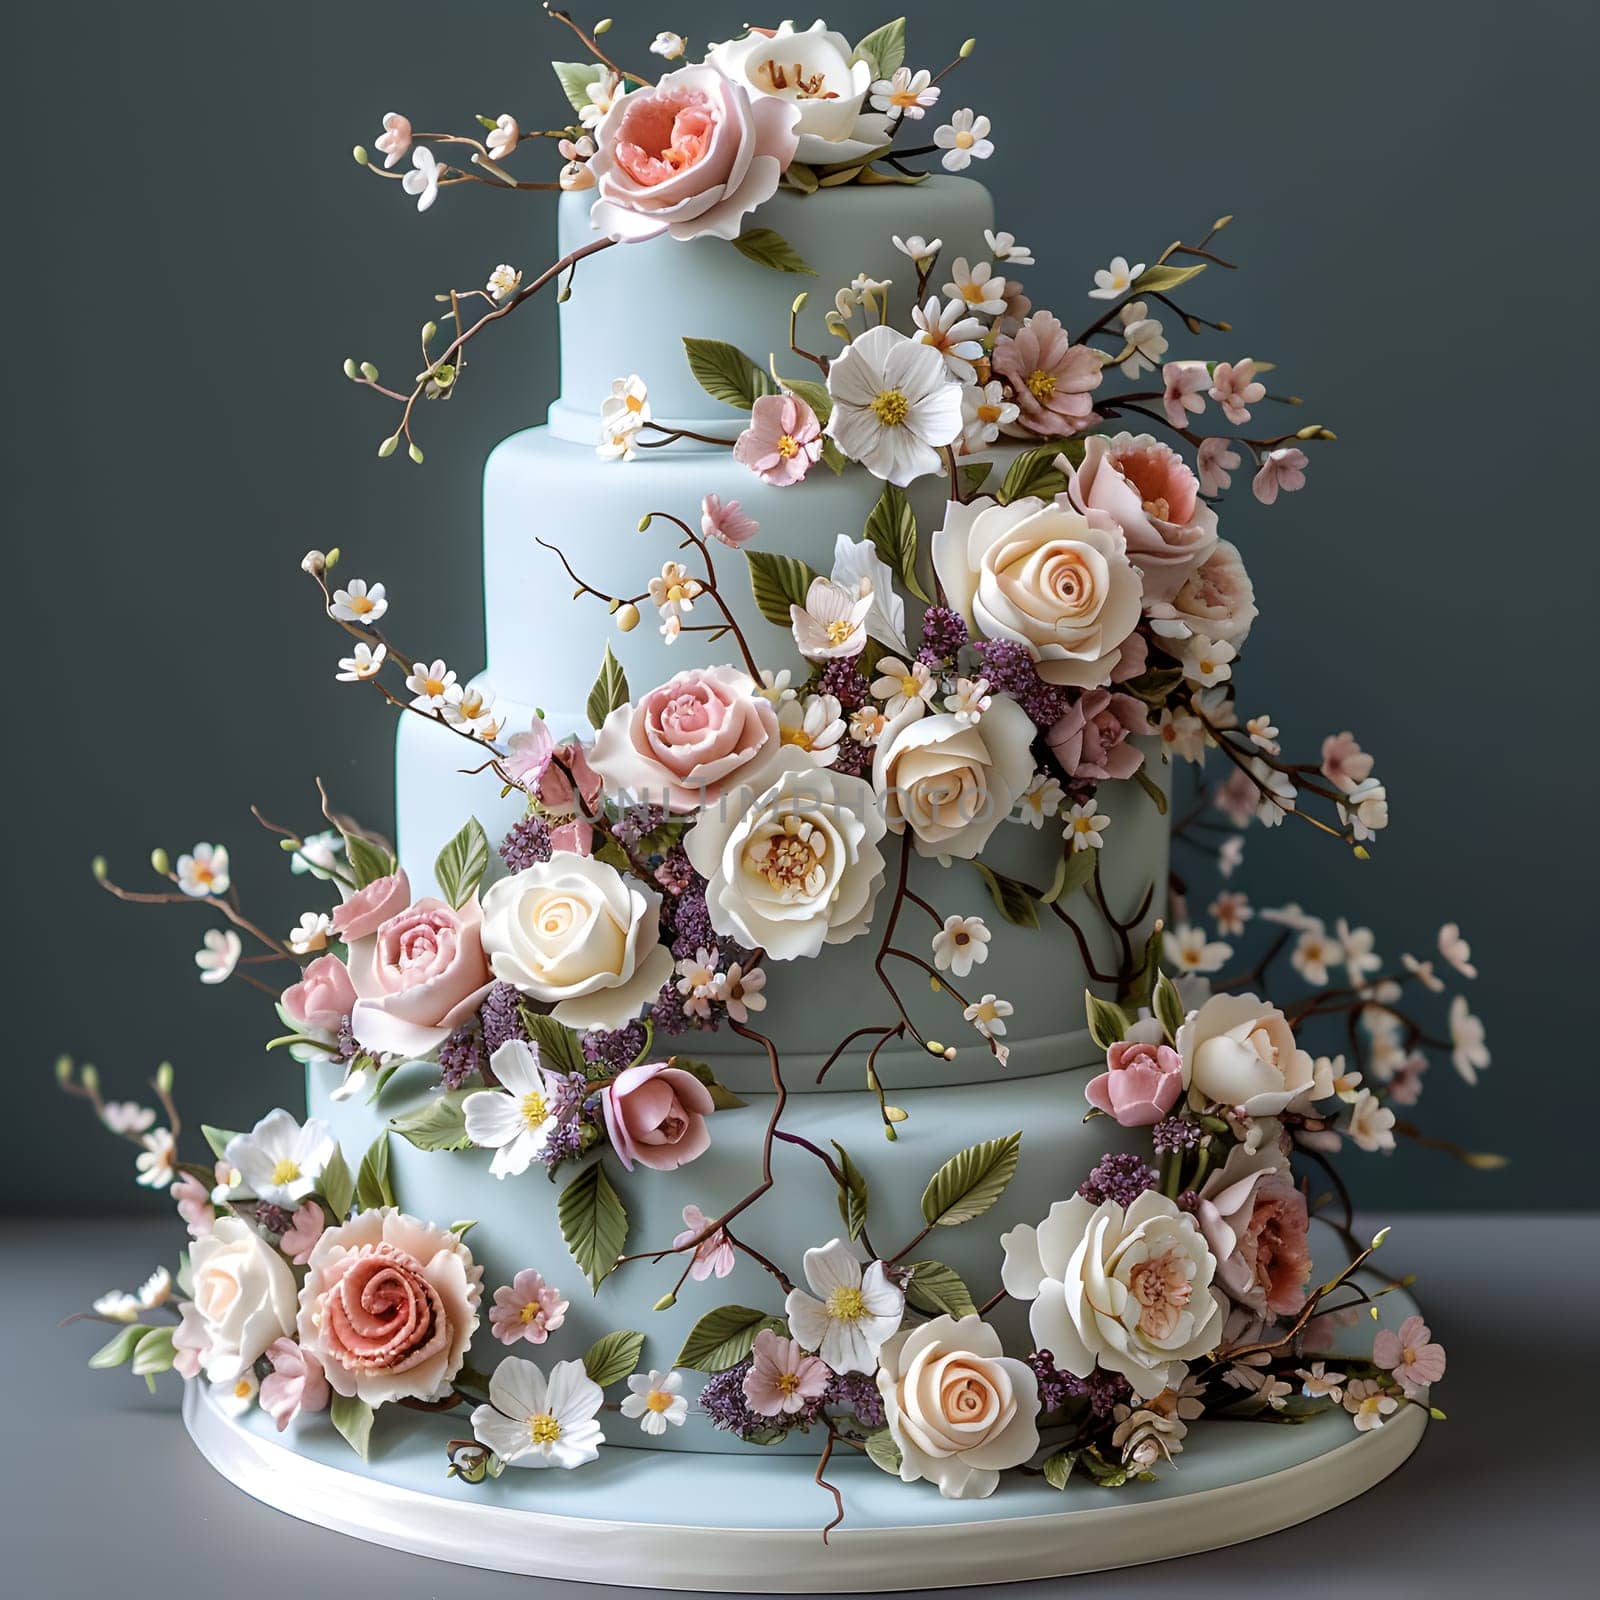 A stunning wedding cake adorned with pink hybrid tea roses and flower petals is elegantly displayed on a table, enhancing the wedding ceremony supply with its beautiful floral arrangement